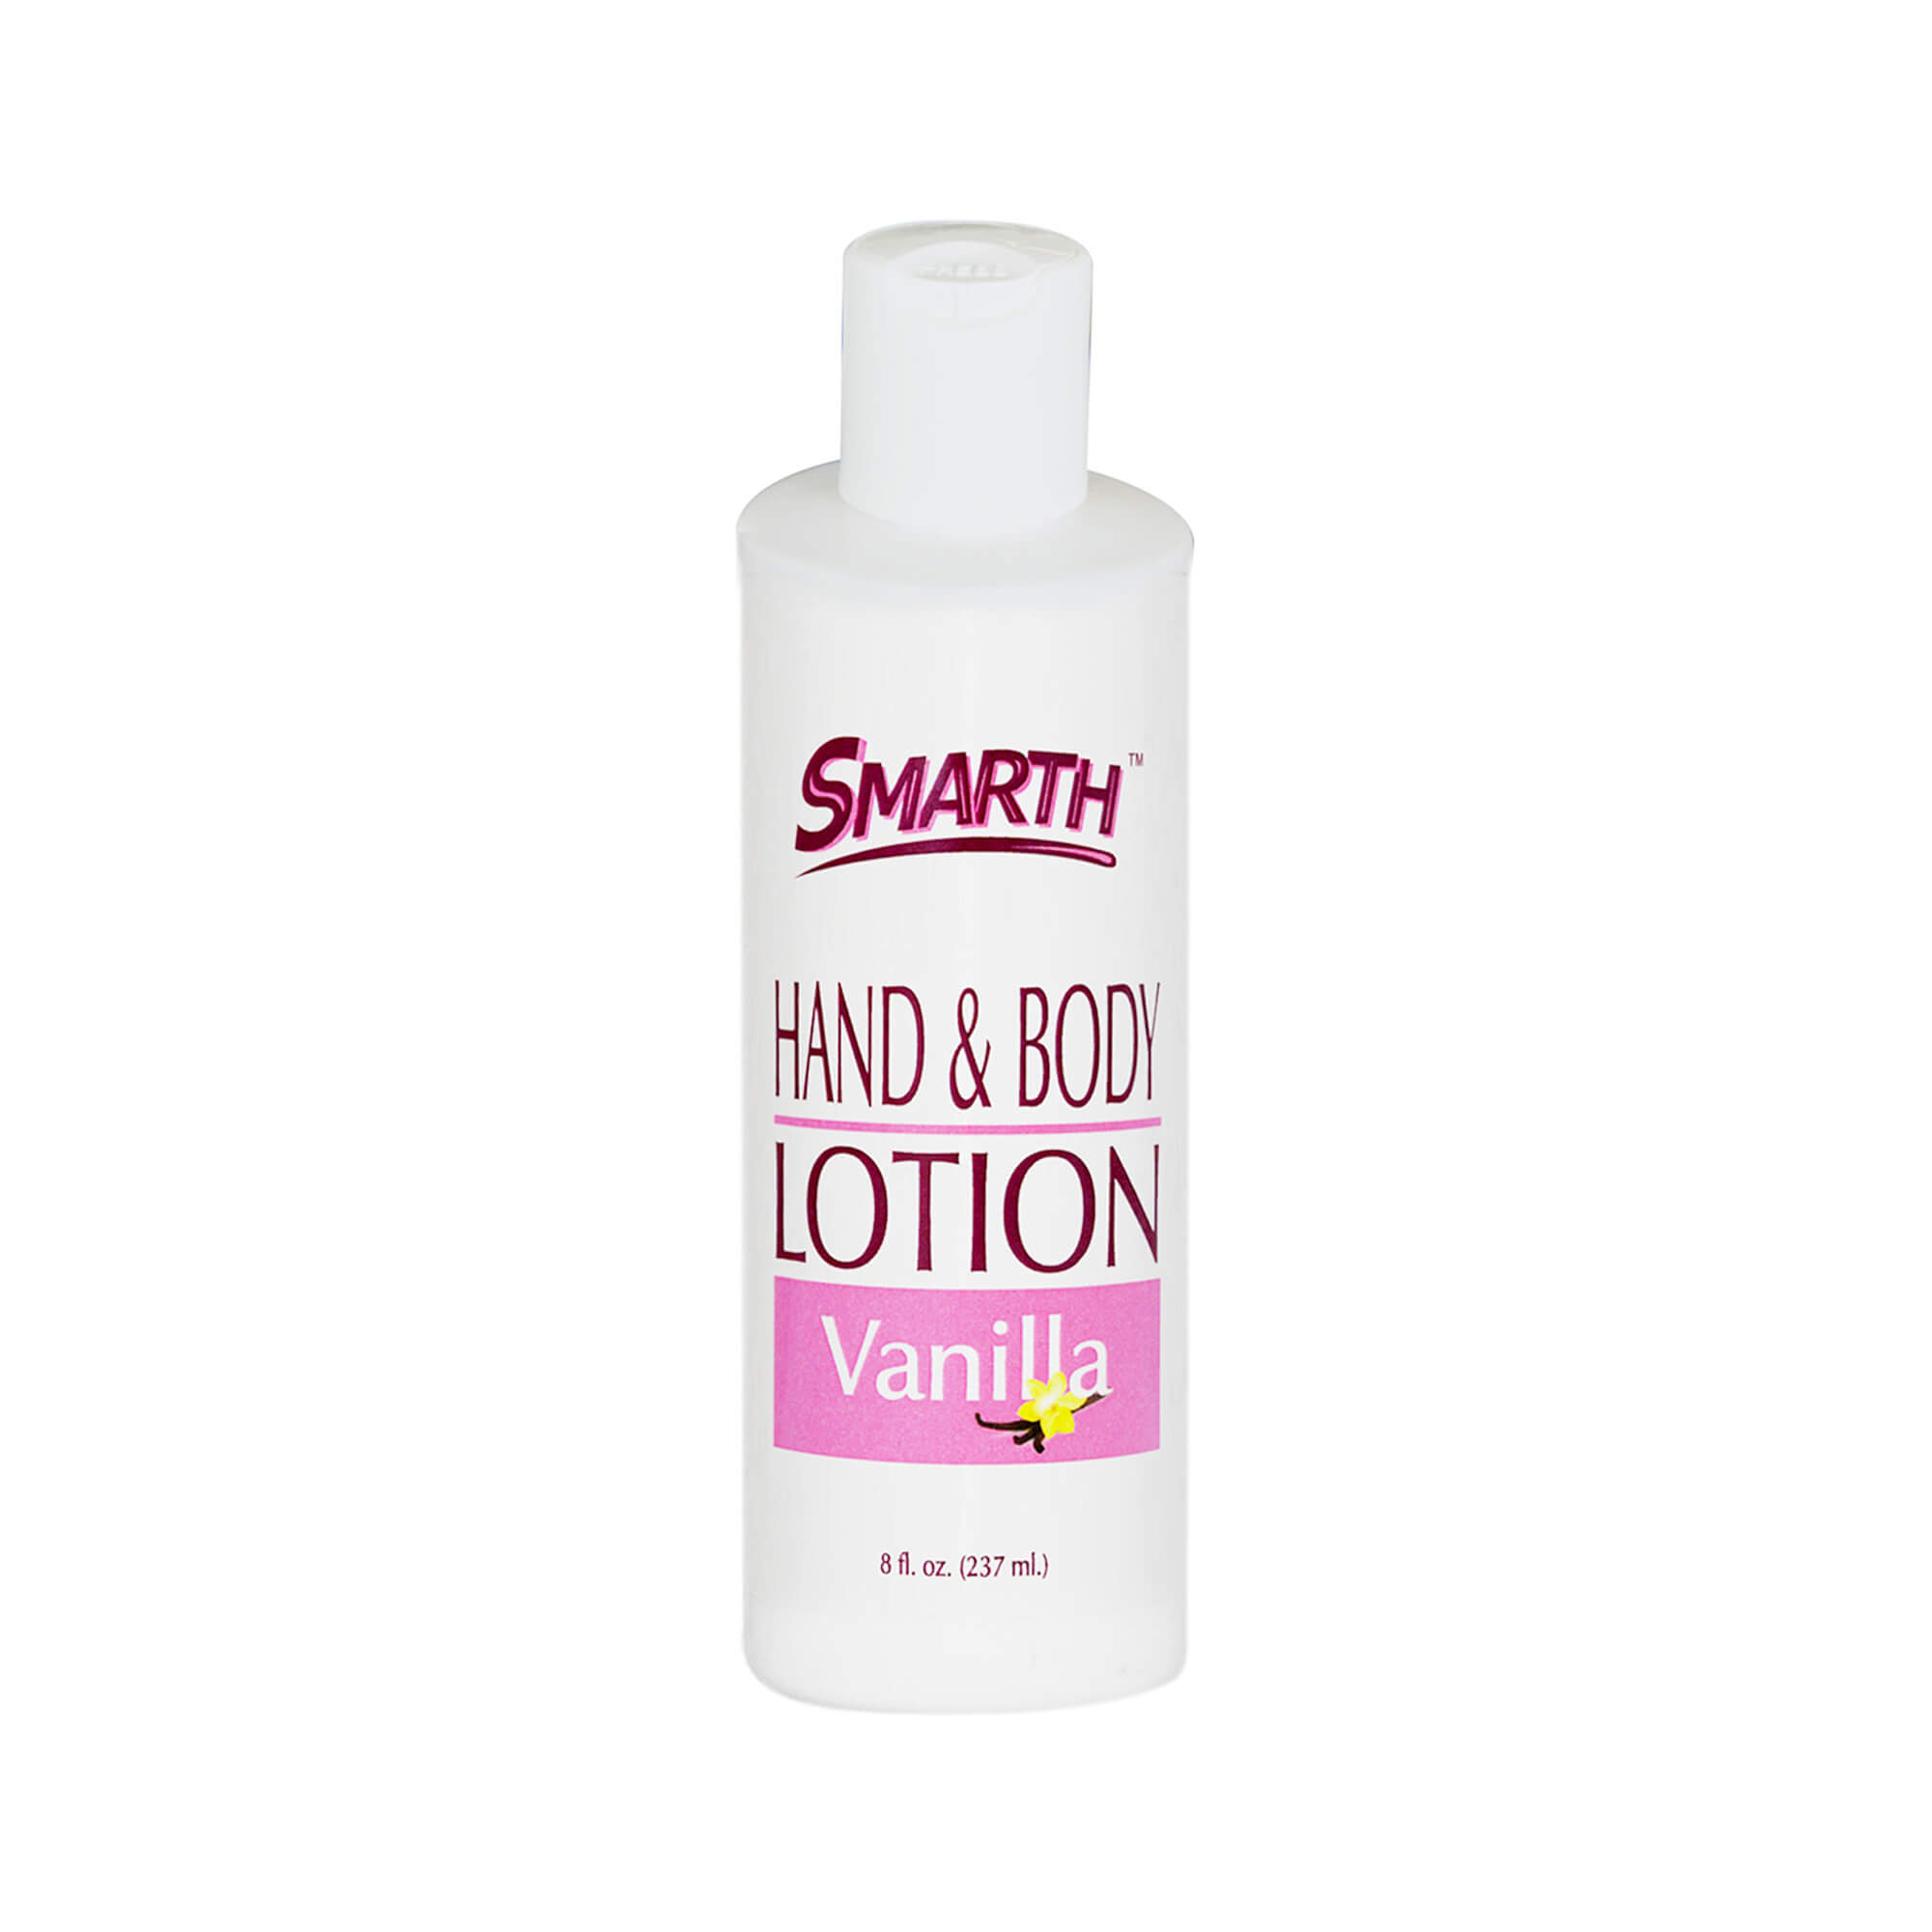 Hand and Body lotion